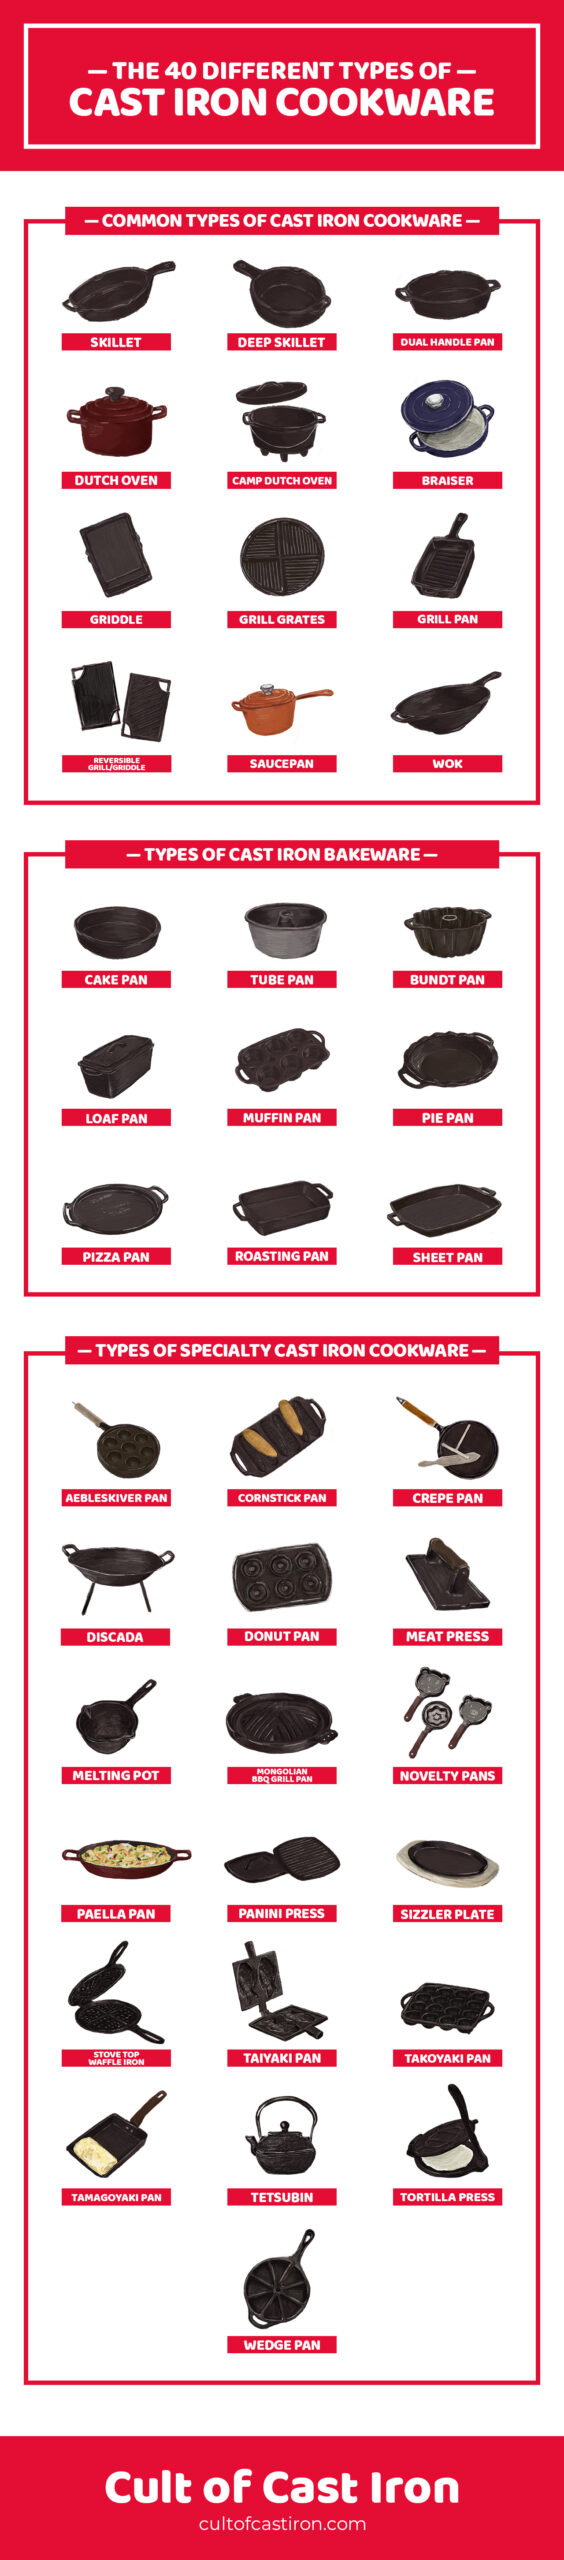 40 different types of cast iron cookware infographic